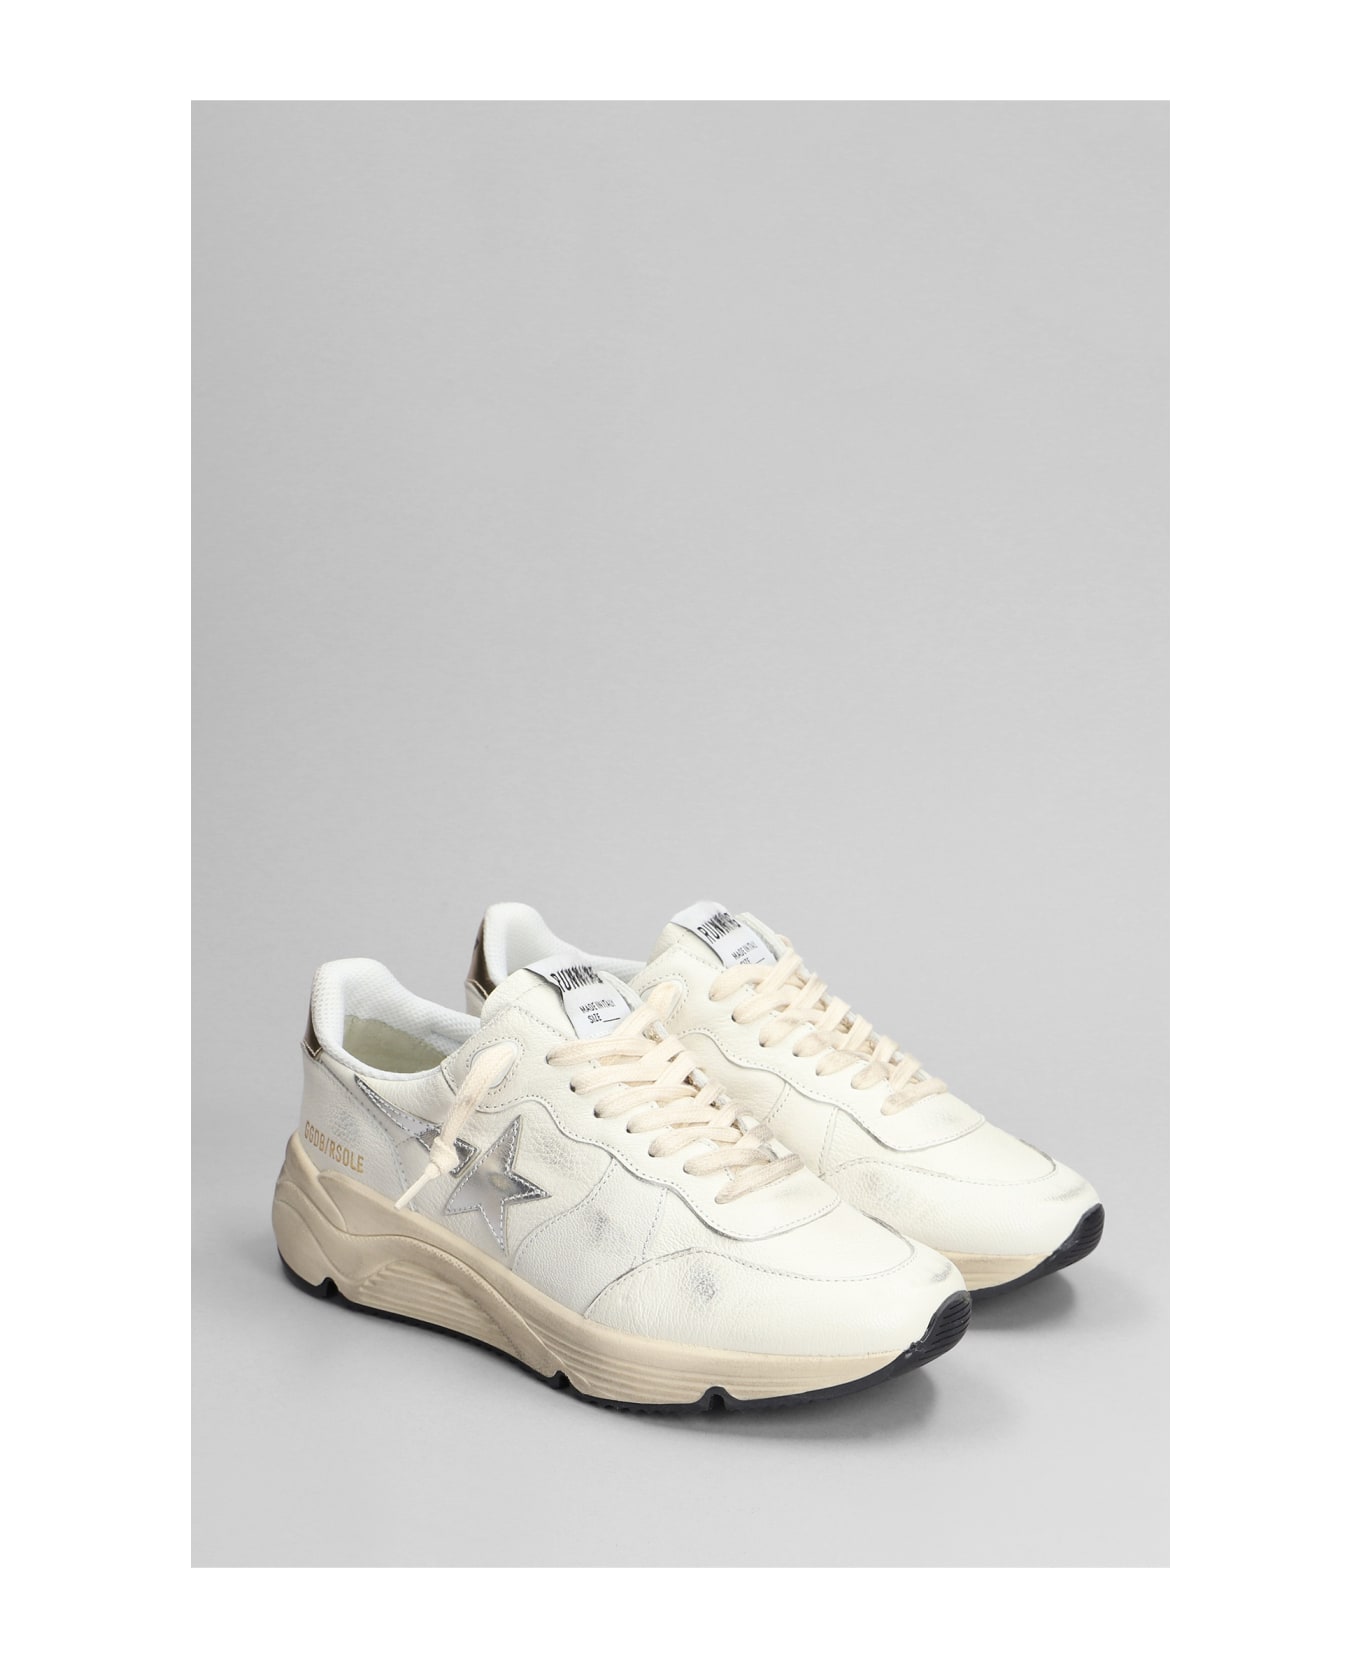 Golden Goose Running Sneakers In White Leather - white